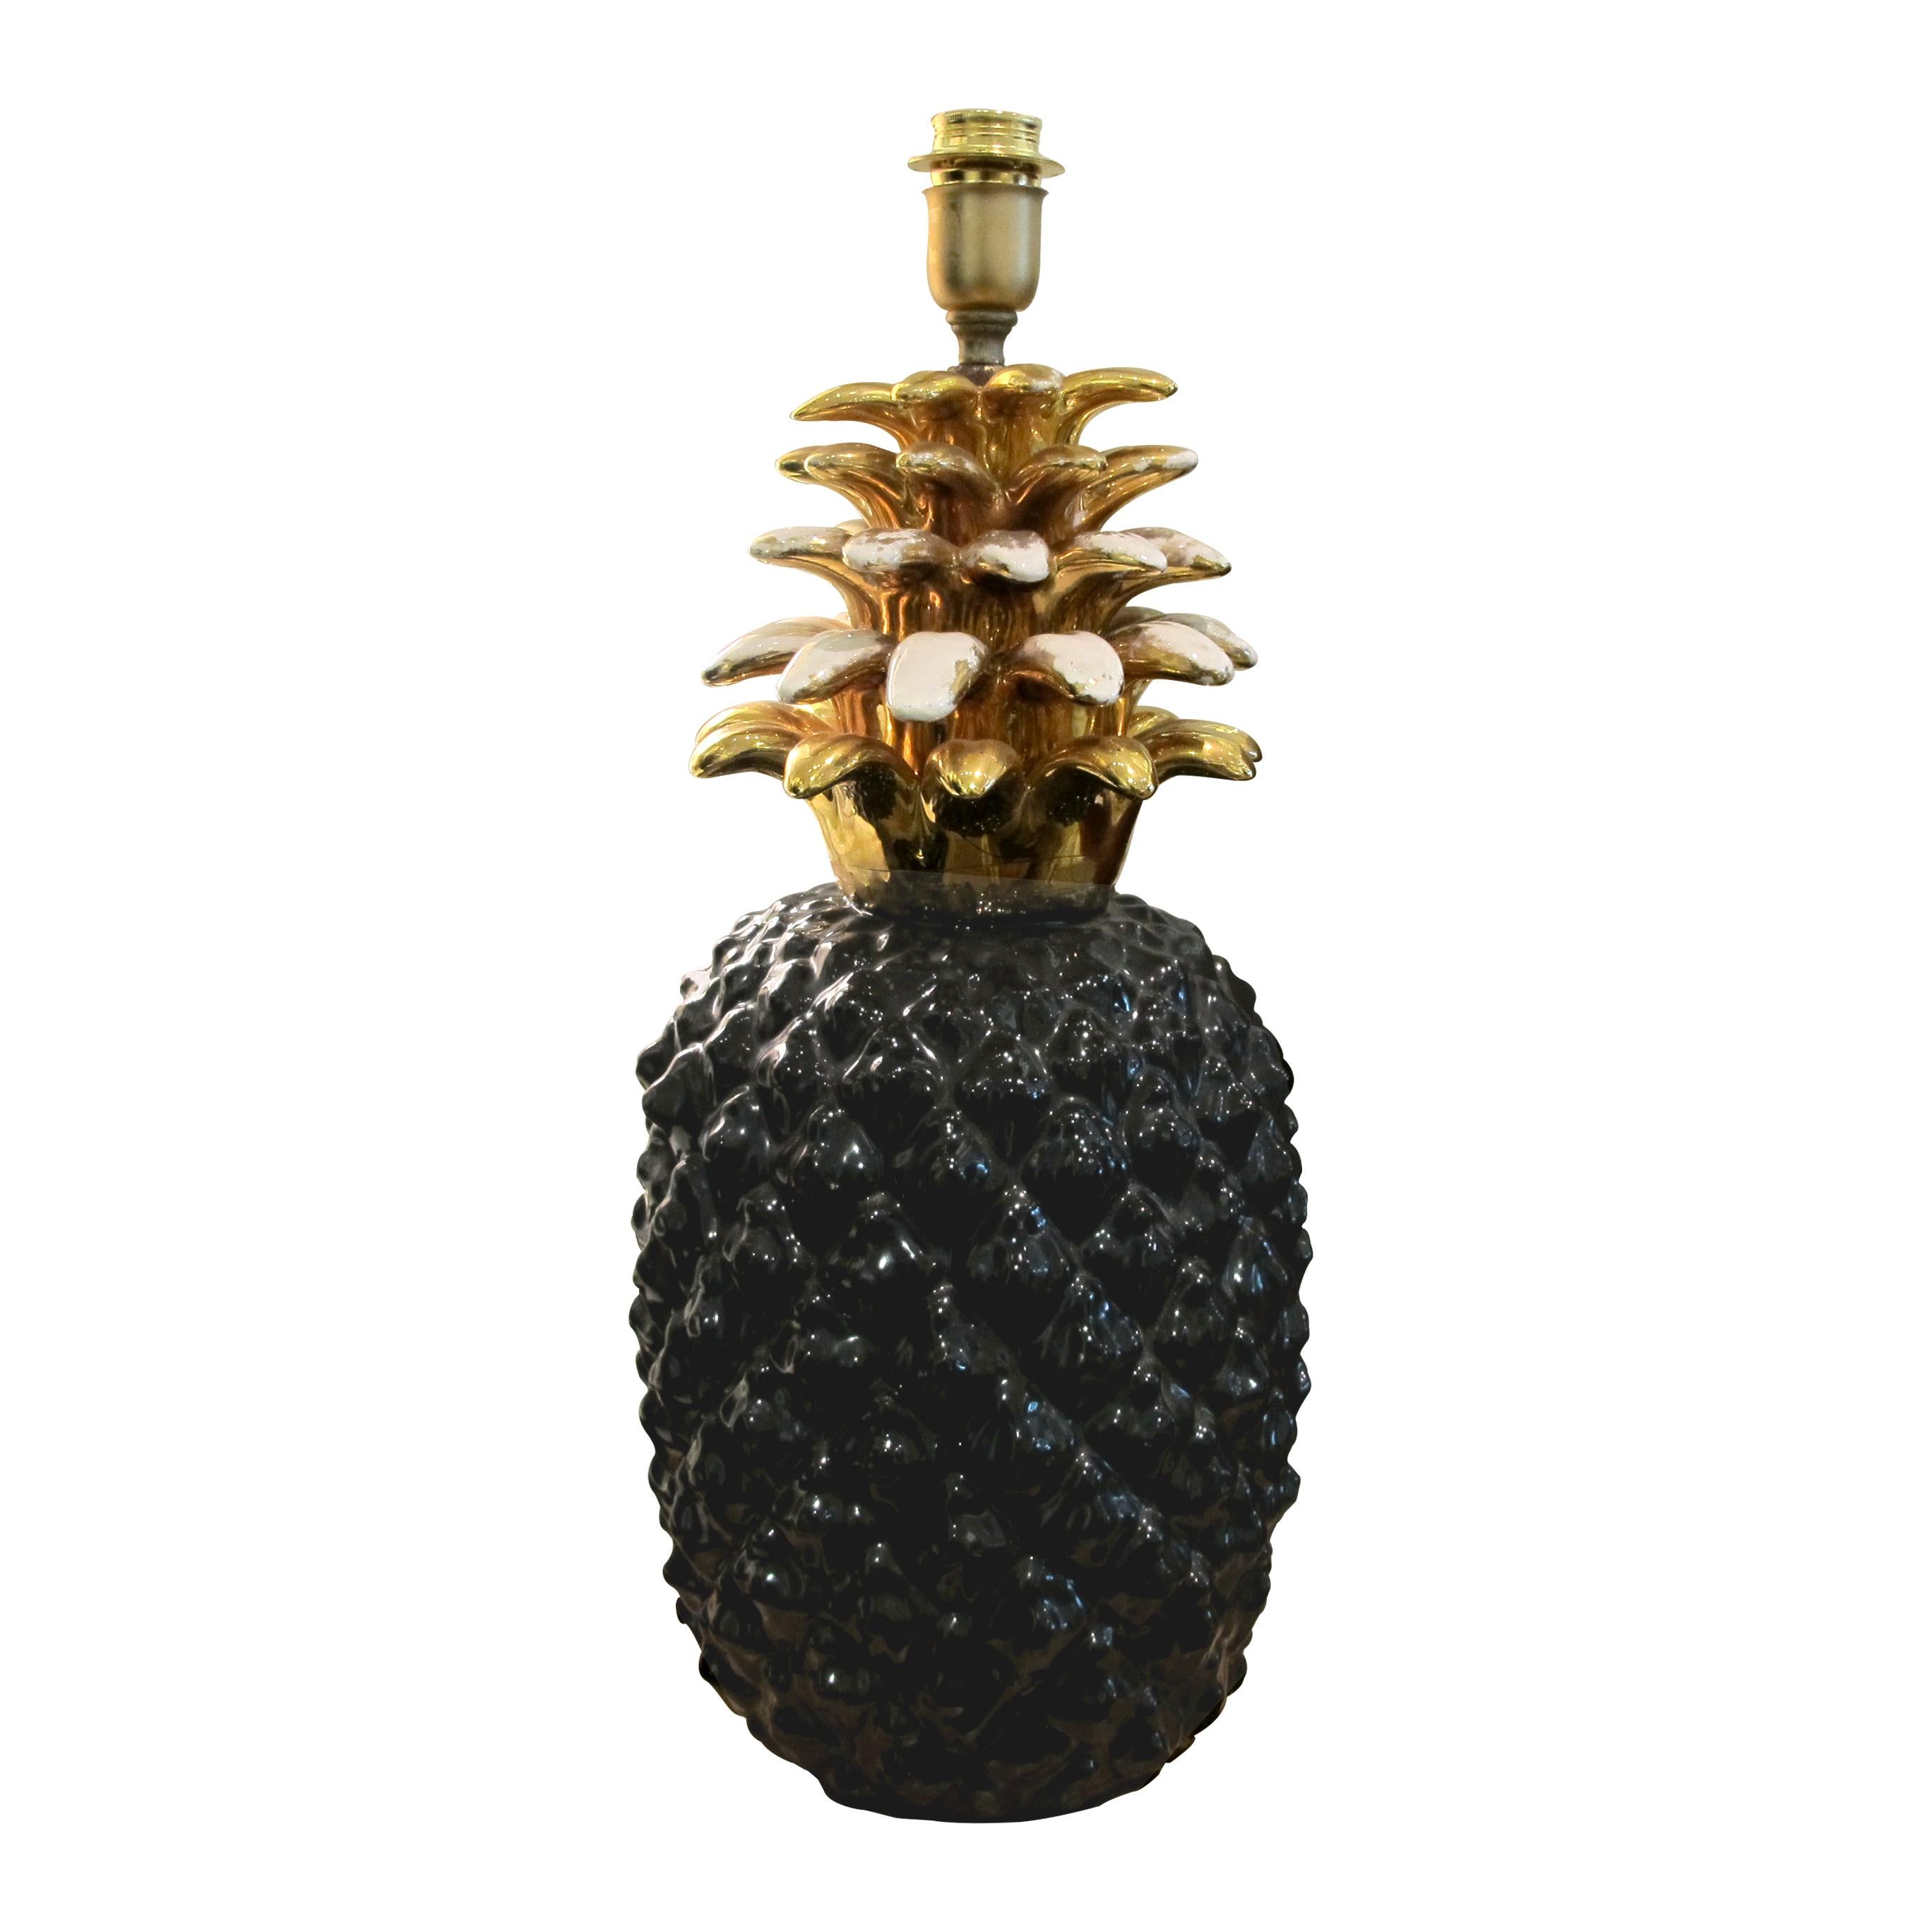 Highly decorative very large French black and gold ceramic pineapple table manufactured by Maison Lancel in the 1970s. The gold pineapple leaves have acquired a beautiful patina commensurate with age. The lamp is newly rewired to the UK standard.